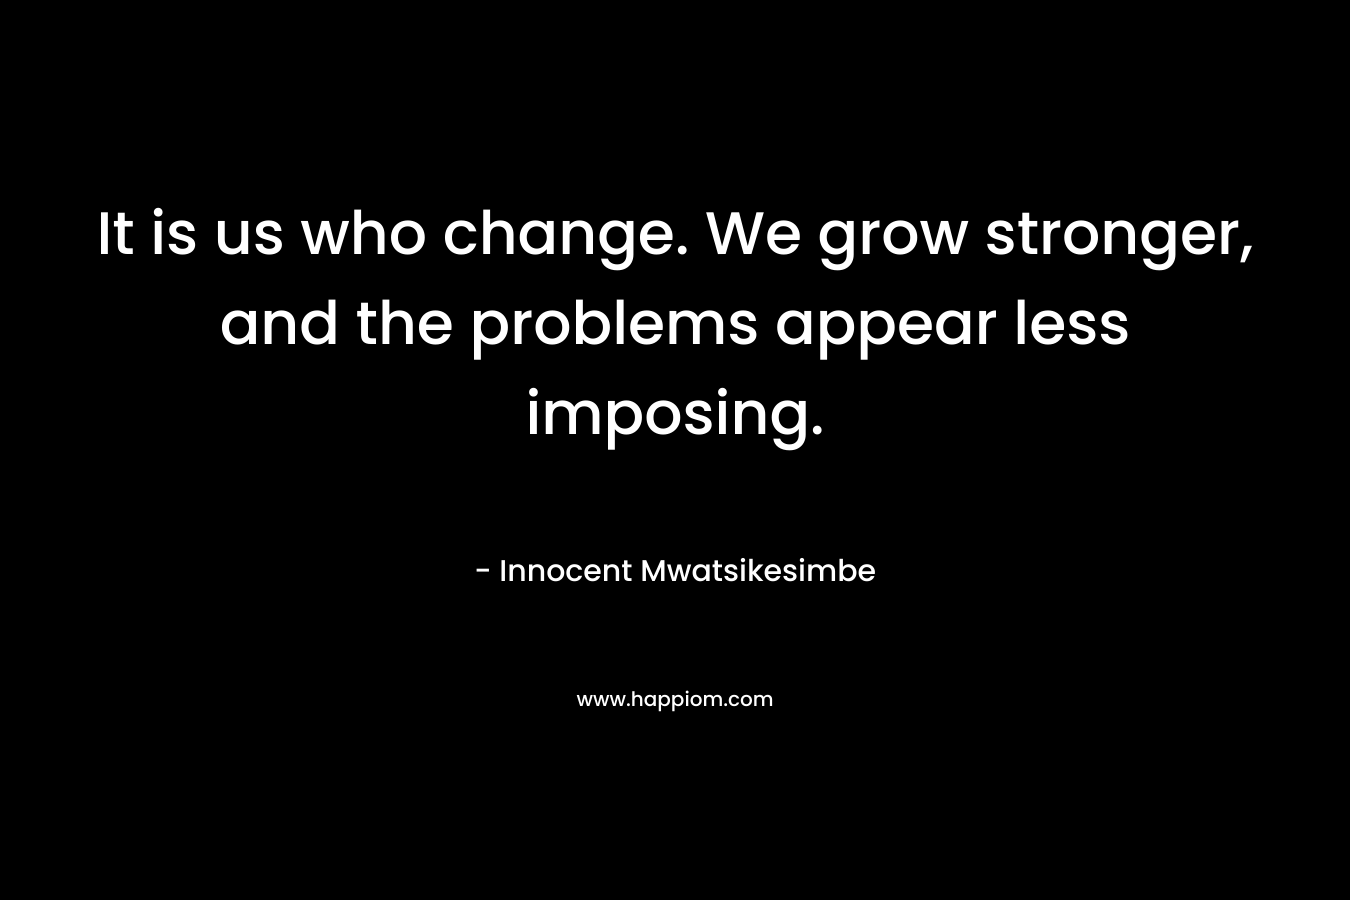 It is us who change. We grow stronger, and the problems appear less imposing. – Innocent Mwatsikesimbe